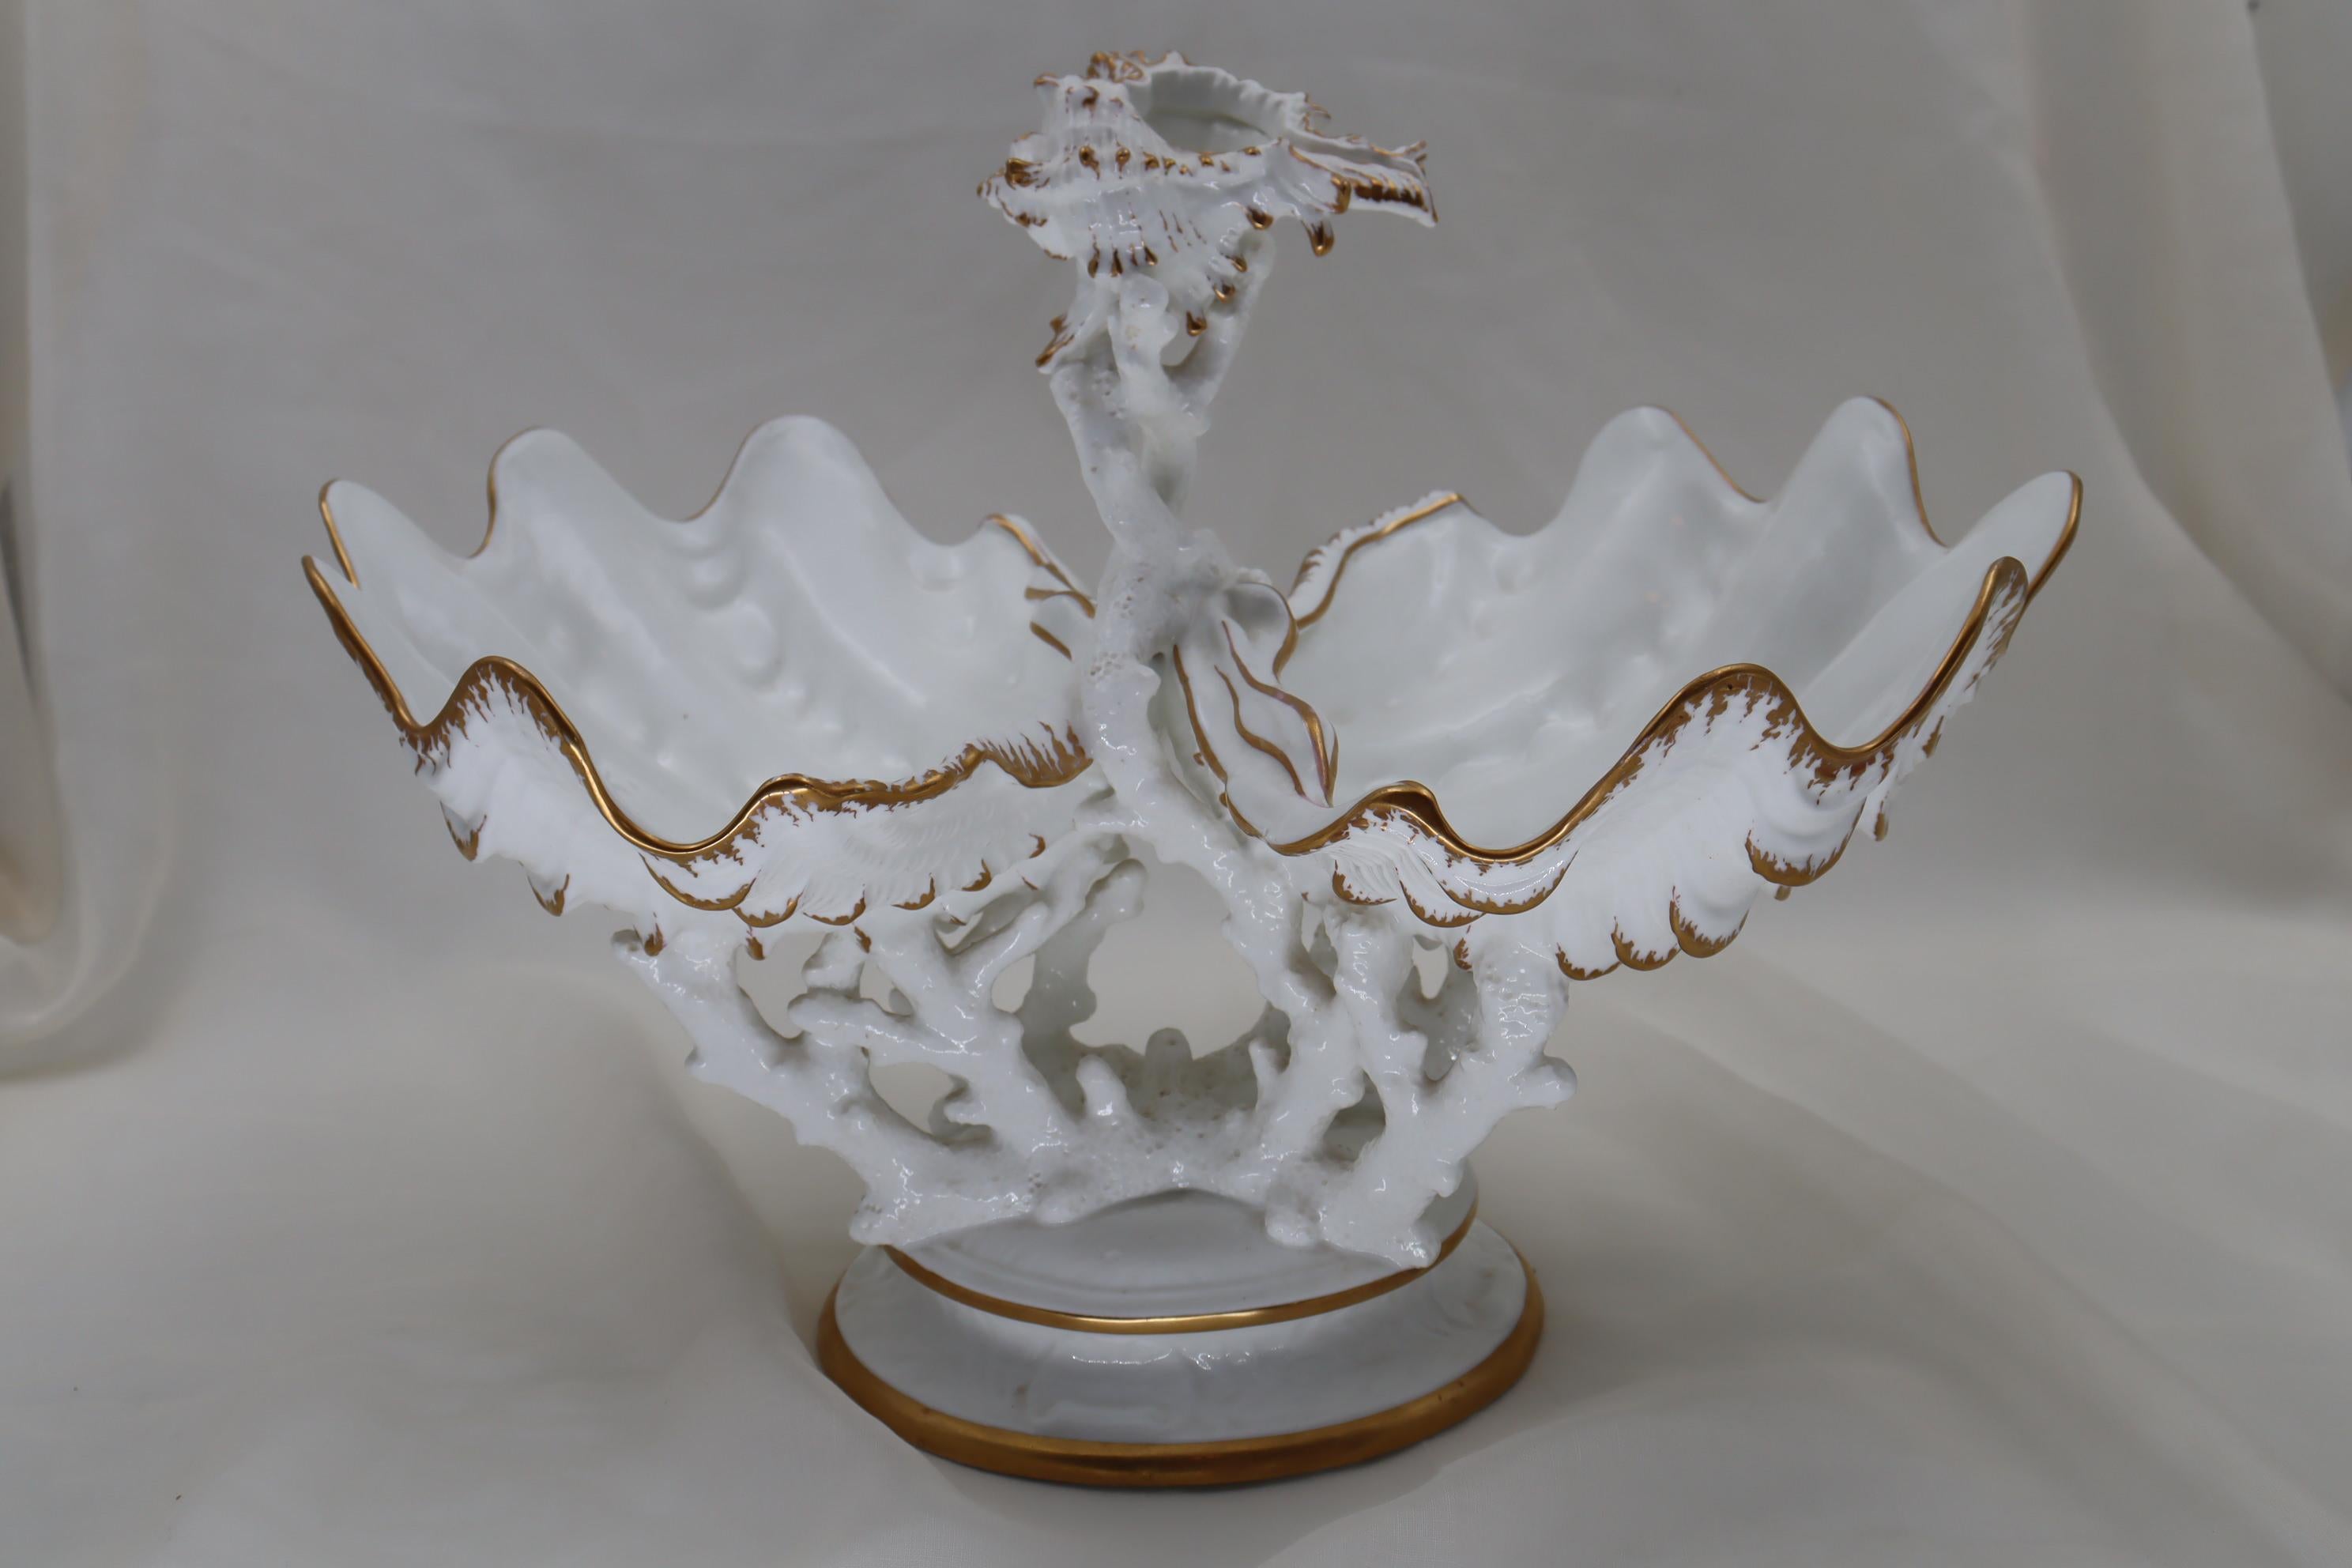 This eyecatching Wedgwood gilt bone china centrepiece is formed by two half clam shells supported on antler coral, which then rests on a round base. Rising up between the shells is more coral, on top of which sits a murex shell. The only decoration